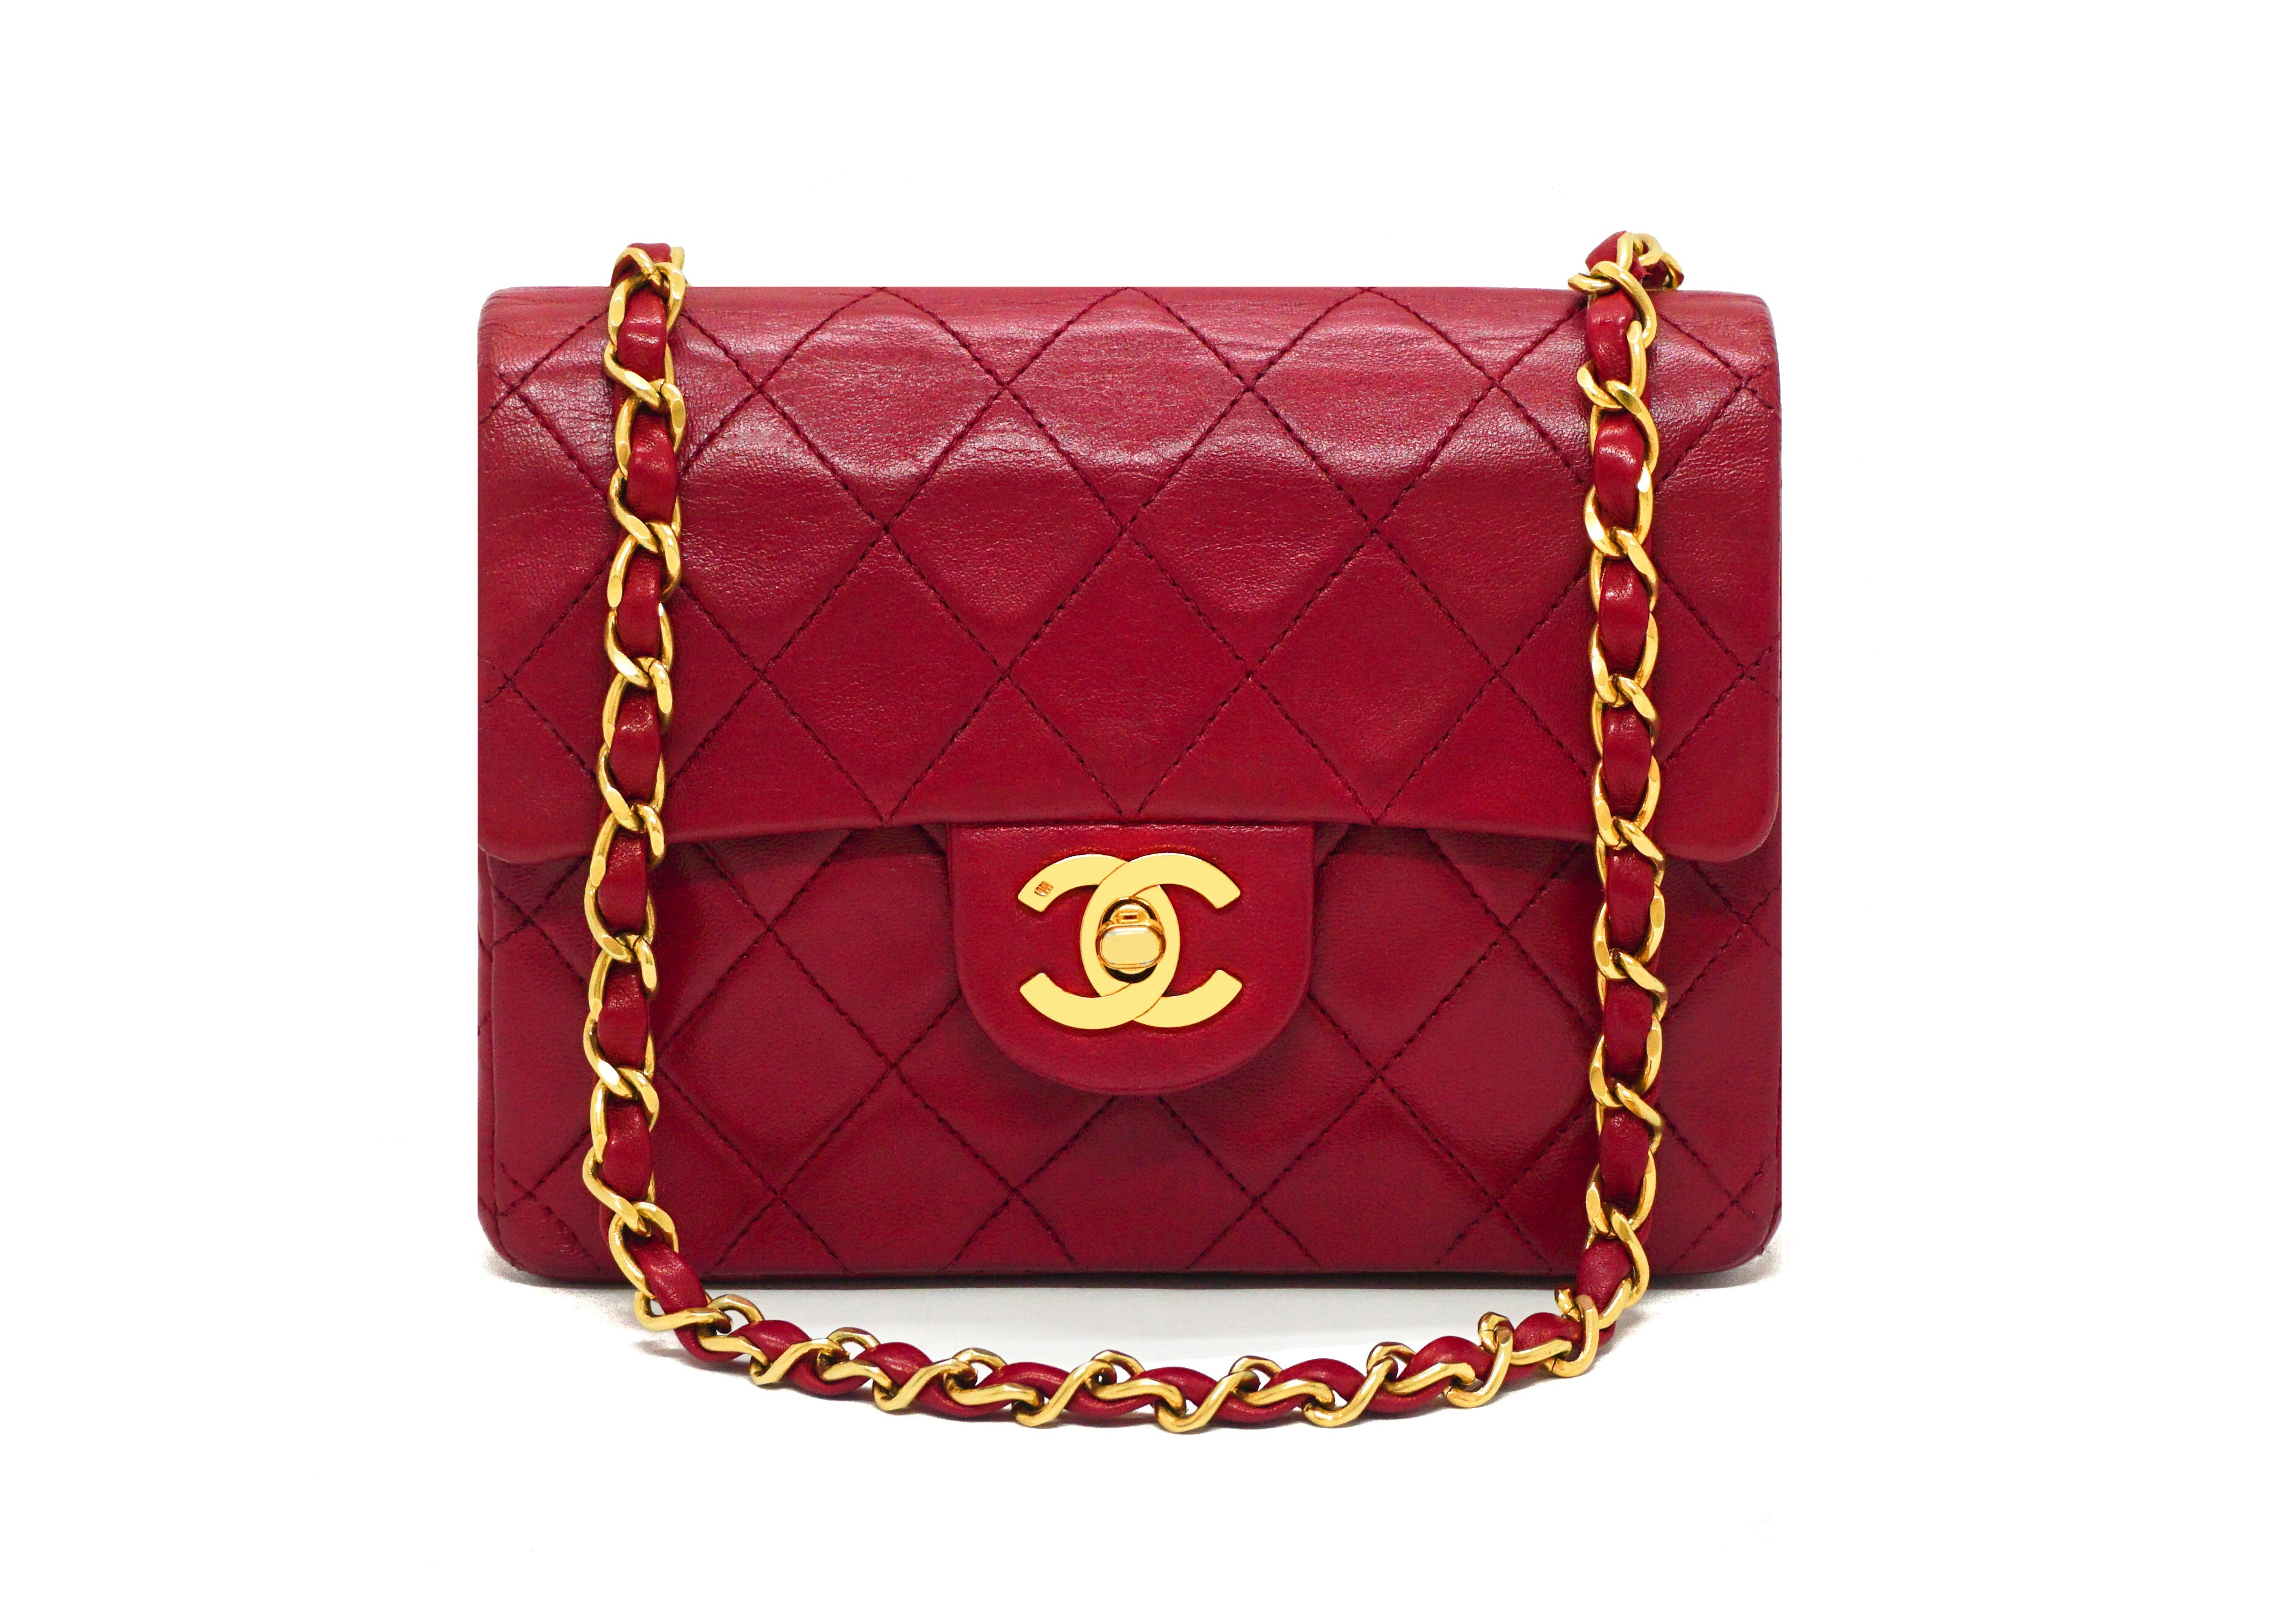 Chanel Mini square handbag in red caviar quilted leather, Silver